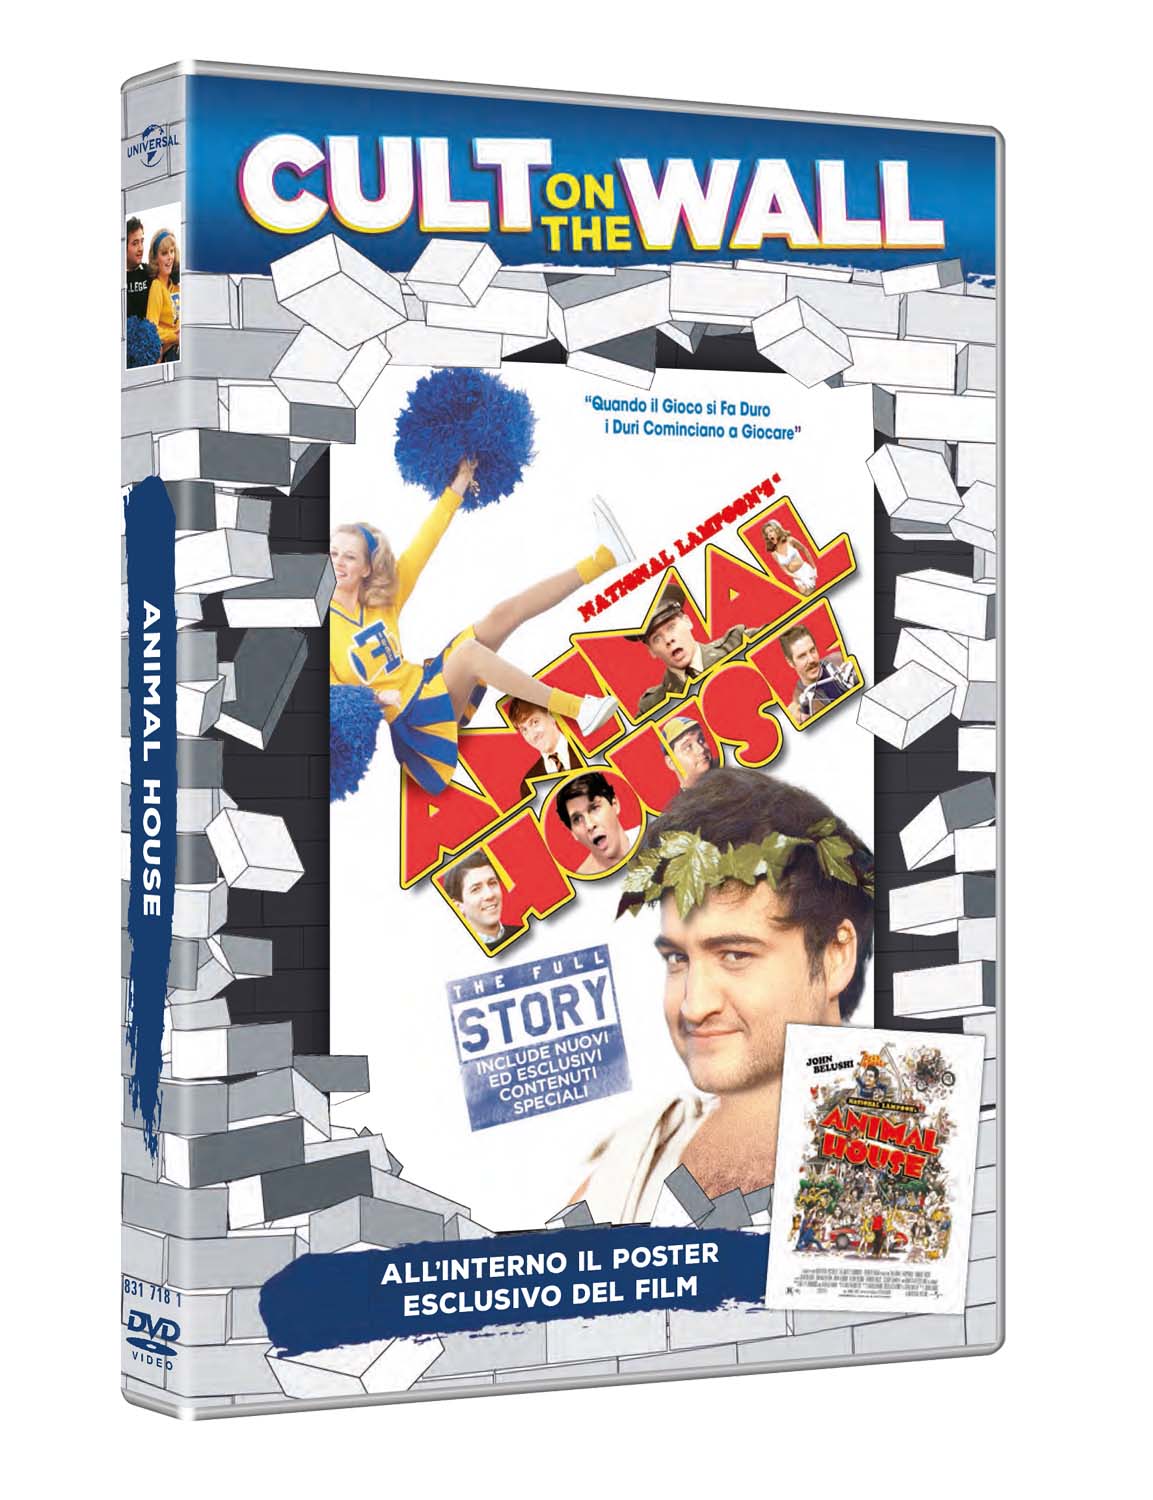 ANIMAL HOUSE (CULT ON THE WALL) (DVD+POSTER)